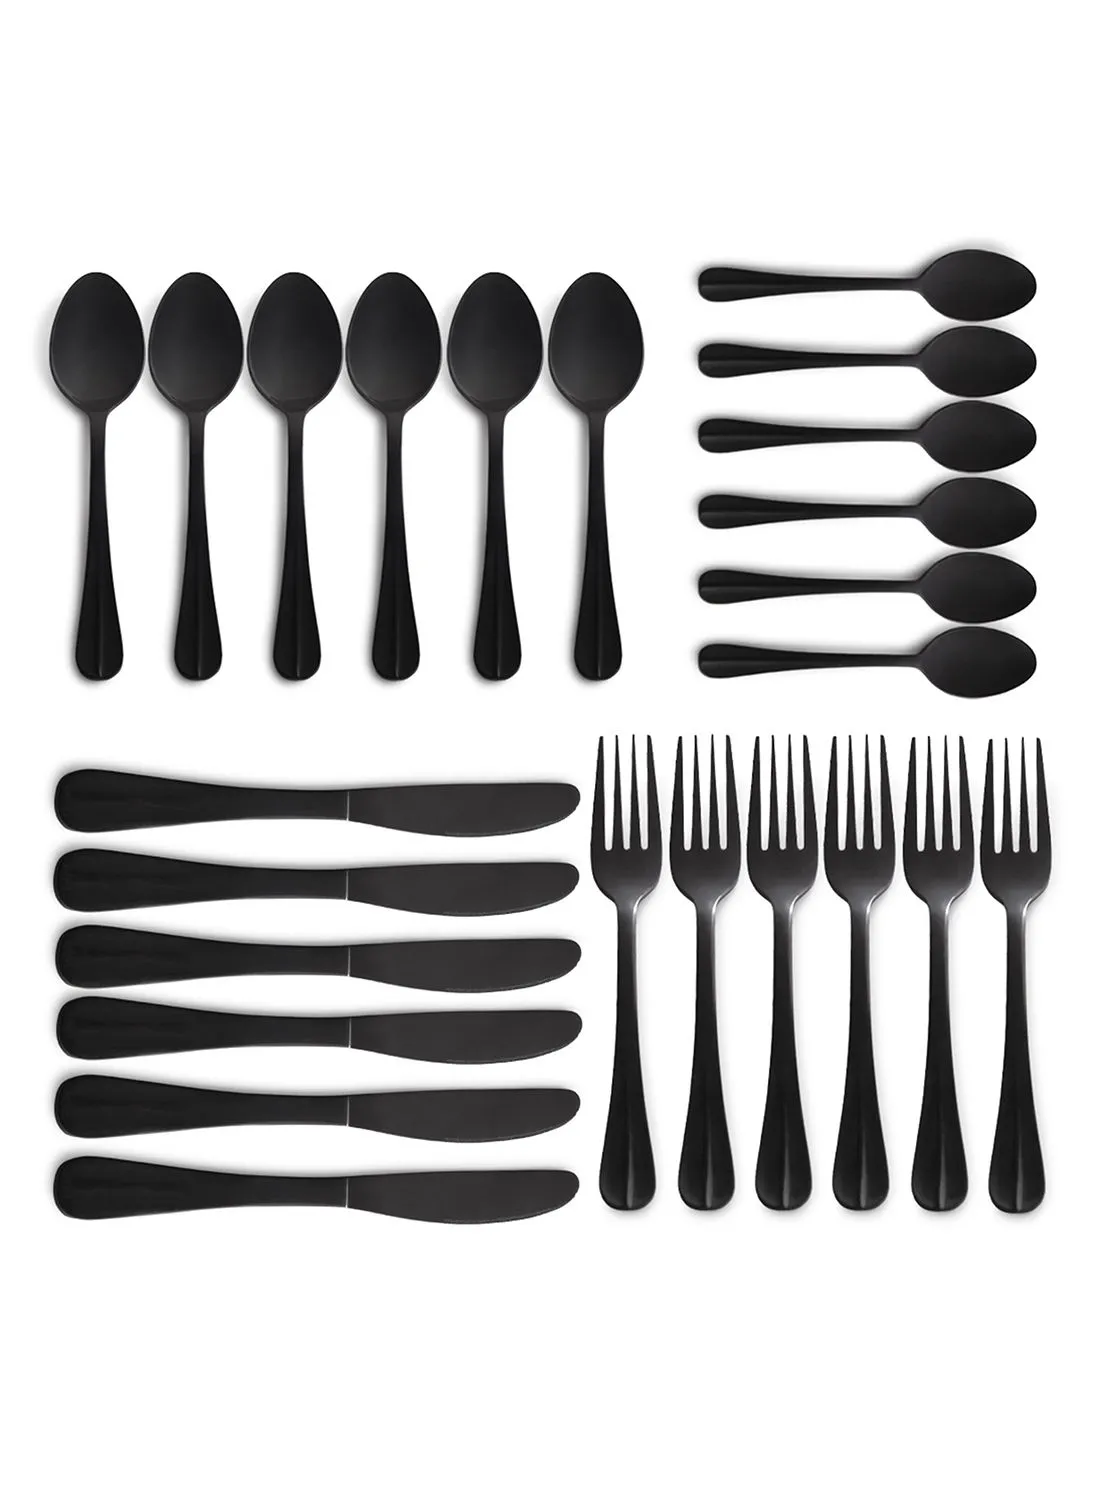 noon east 24 Piece Cutlery Set - Made Of Stainless Steel - Silverware Flatware - Spoons And Forks Set, Spoon Set - Table Spoons, Tea Spoons, Forks, Knives - Serves 6 - Design Black Flowrish